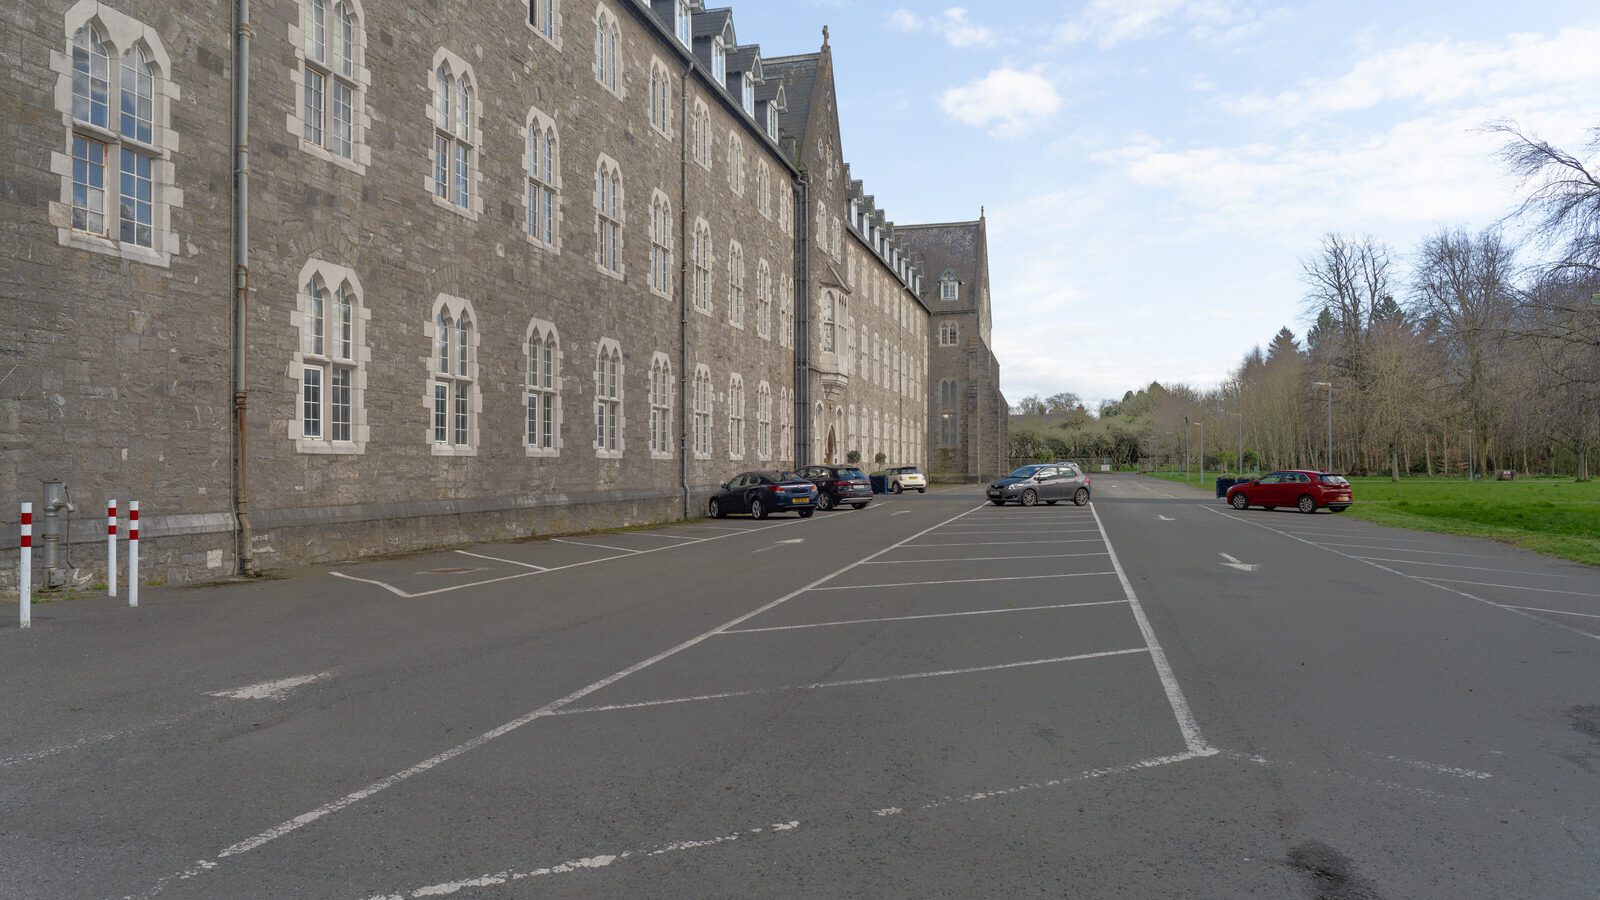 ST PATRICK'S COLLEGE IN MAYNOOTH [COUNTY KILDARE]-223084-1